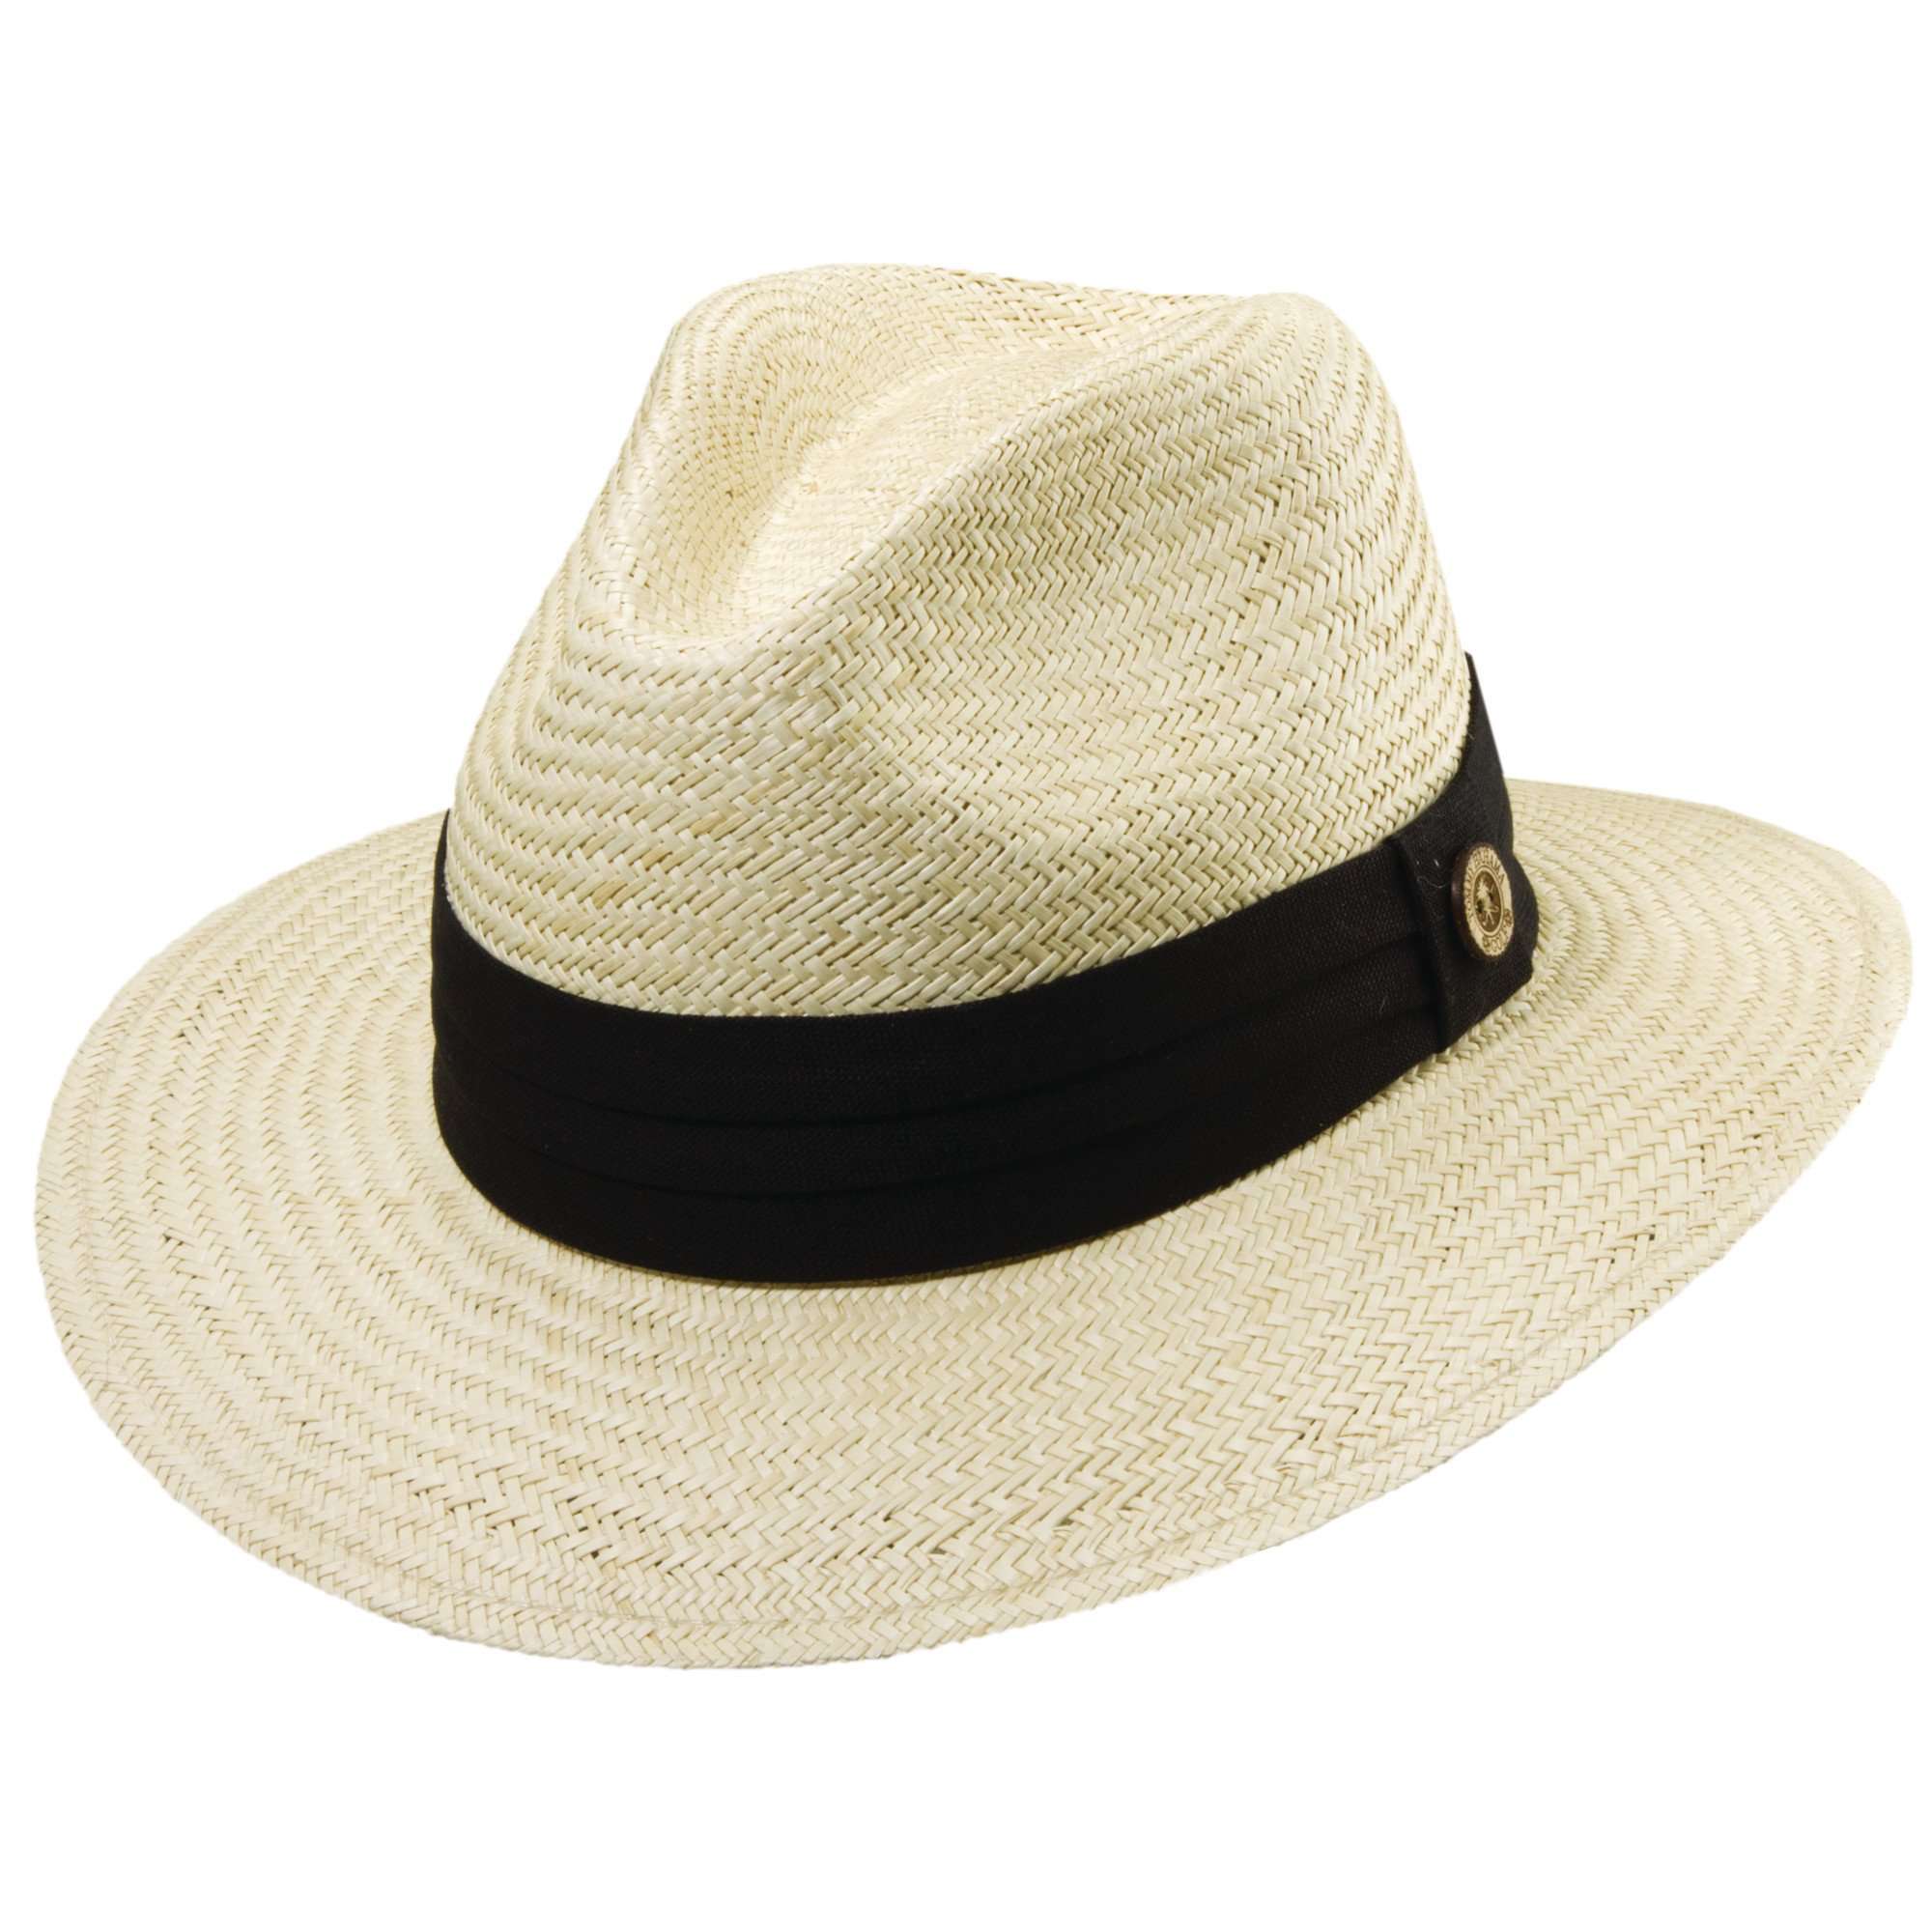 Tommy Bahama Palm Safari Hat with 3-Pleat Cotton Band - Black Band Safari Hat Tommy Bahama Hats tbw137M Natural S/M 